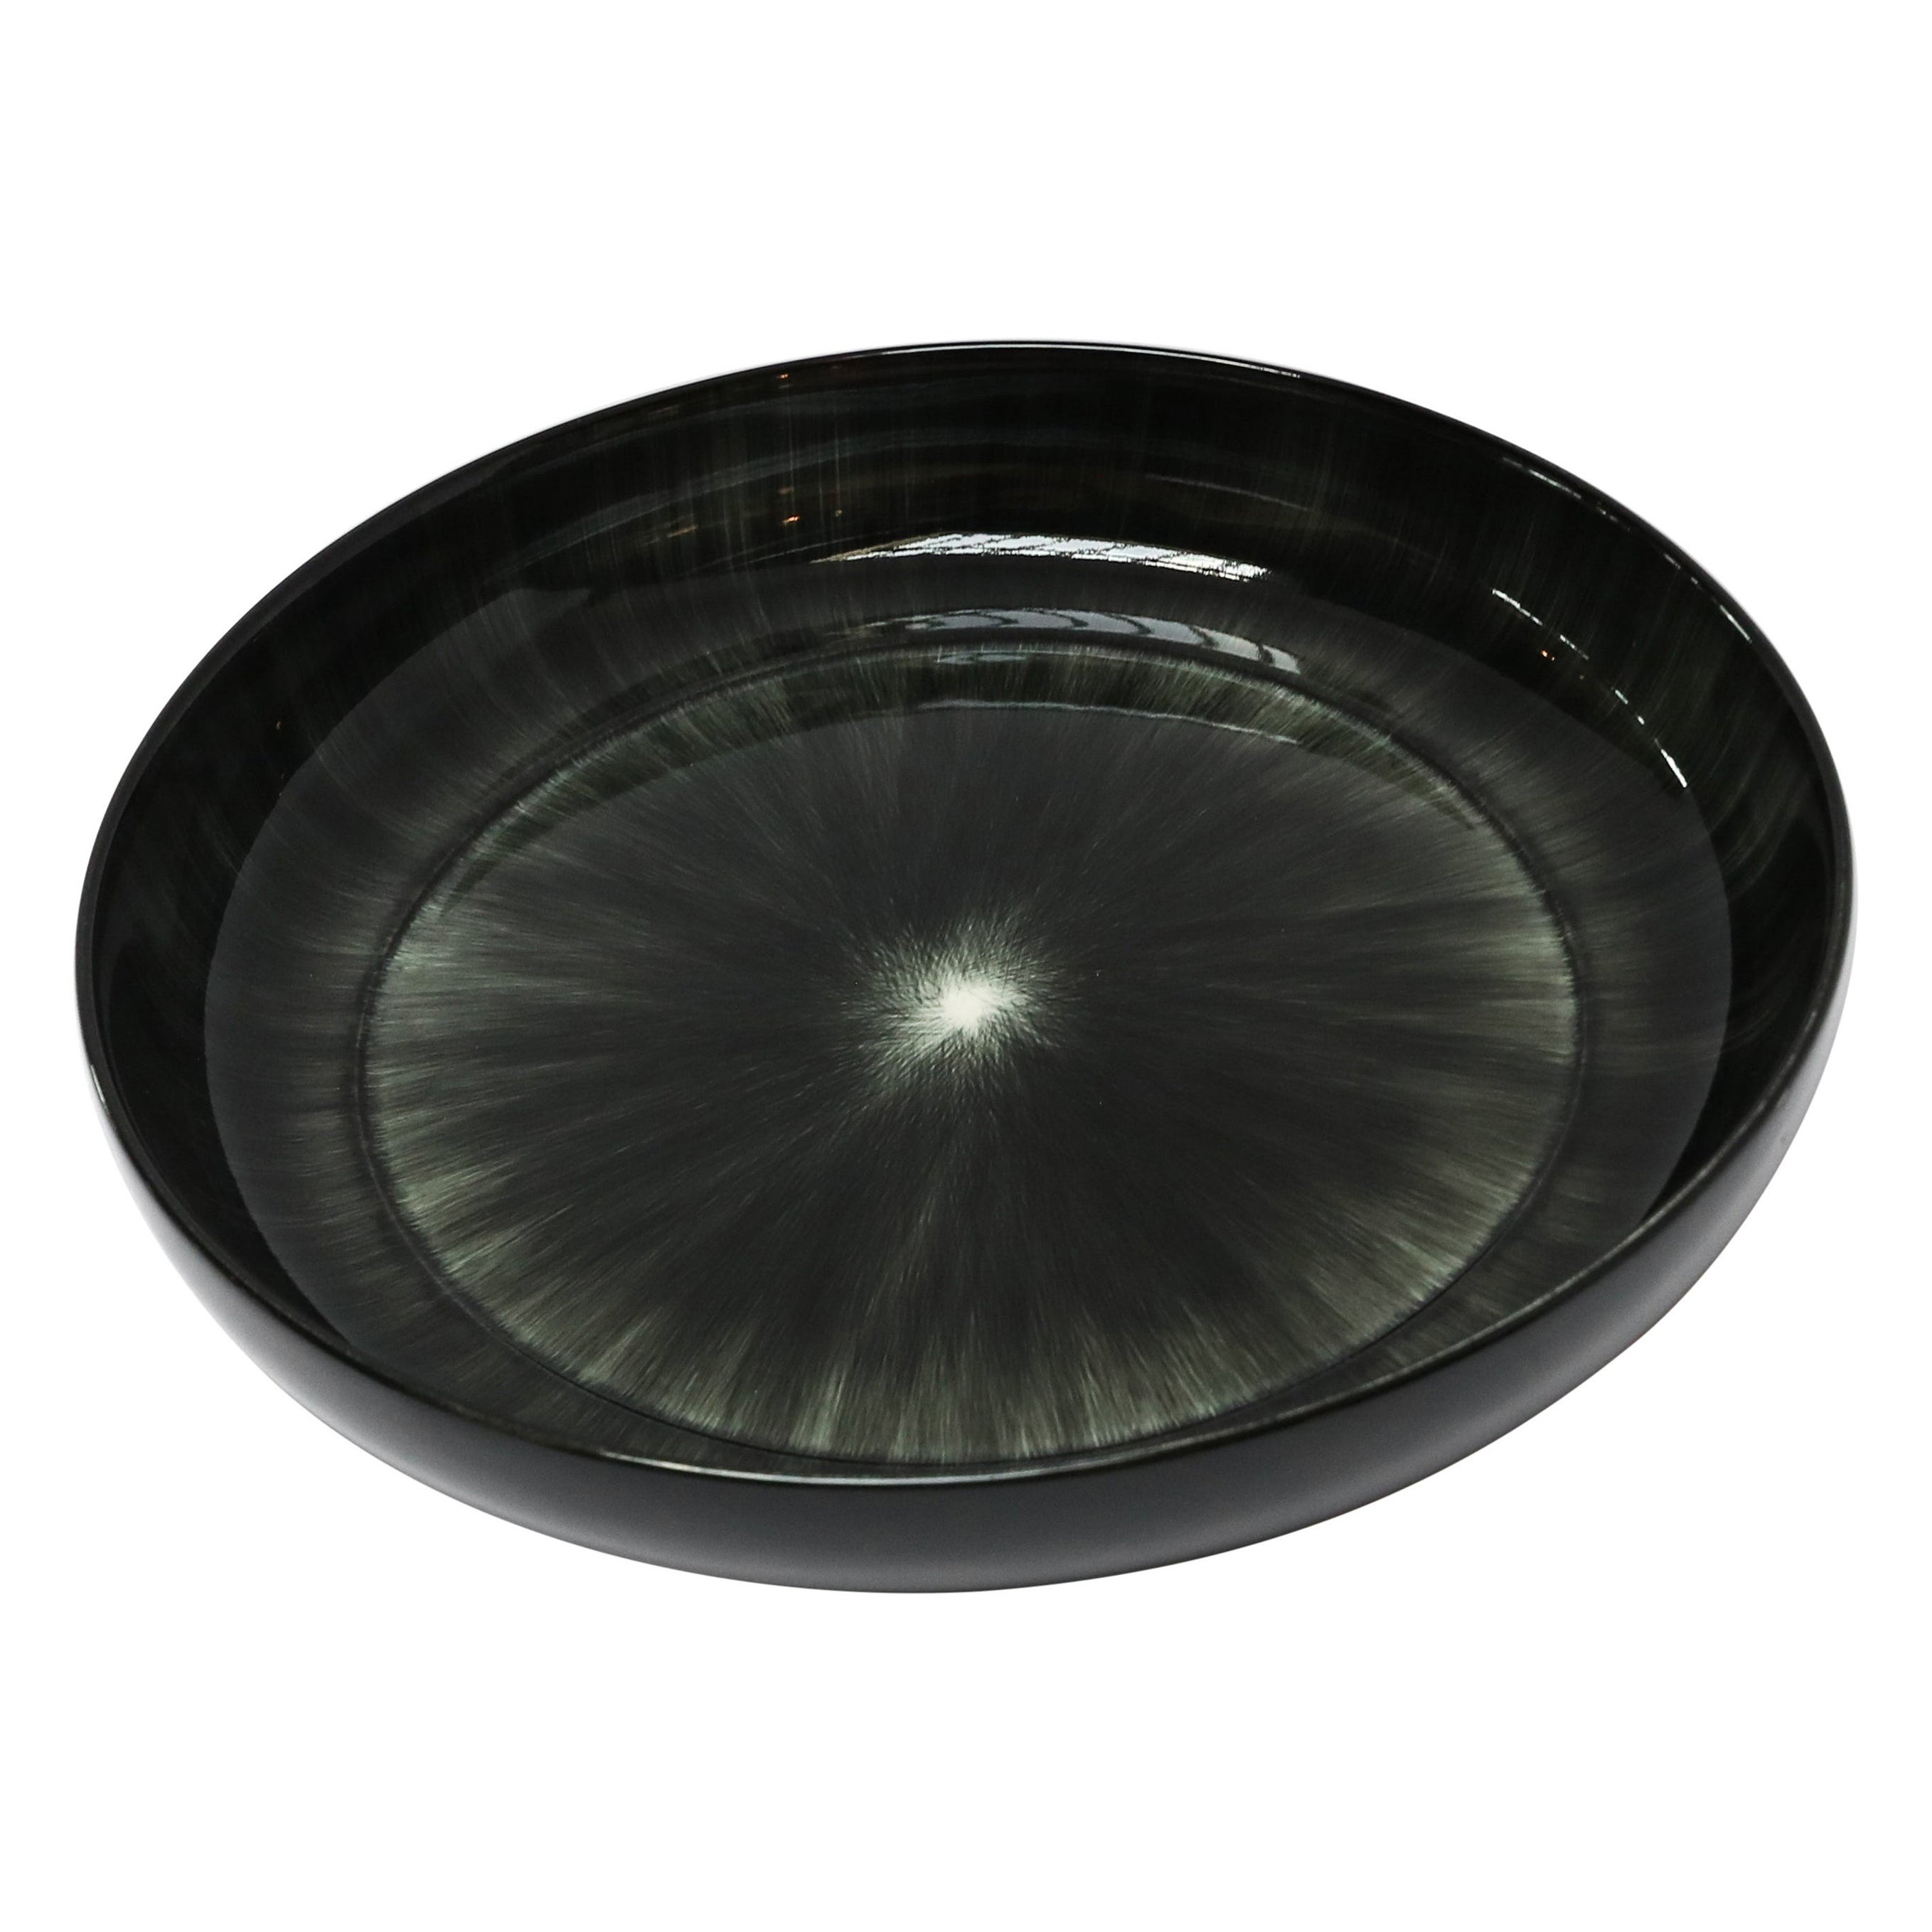 Ann Demeulemeester for Serax Dé Large High Plate / Bowl in Black / off White